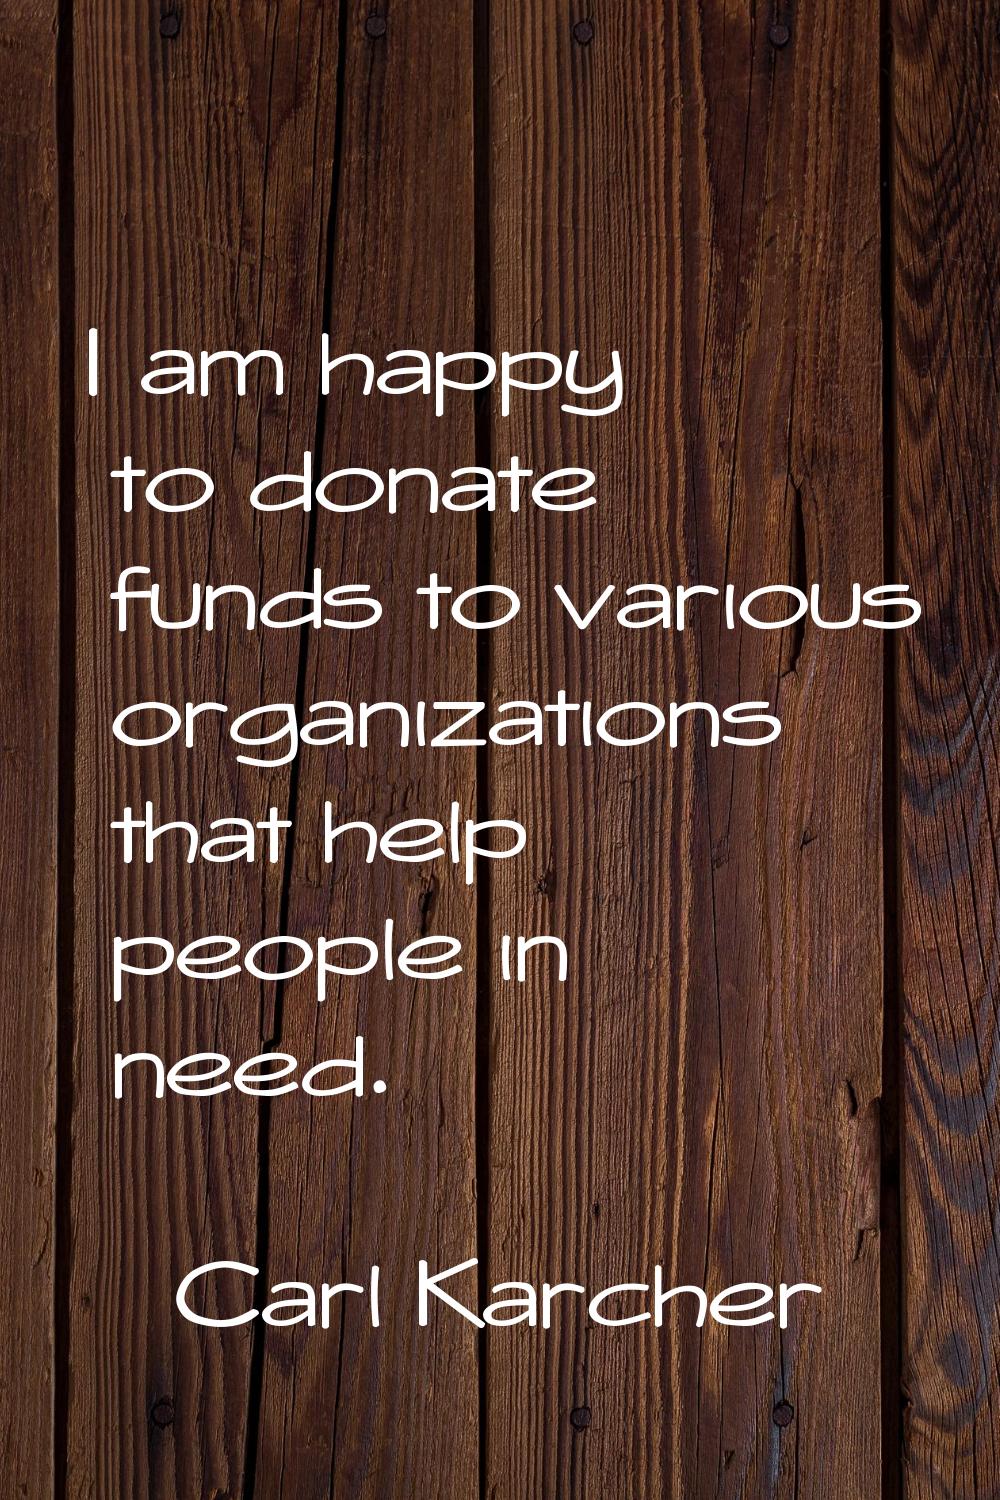 I am happy to donate funds to various organizations that help people in need.